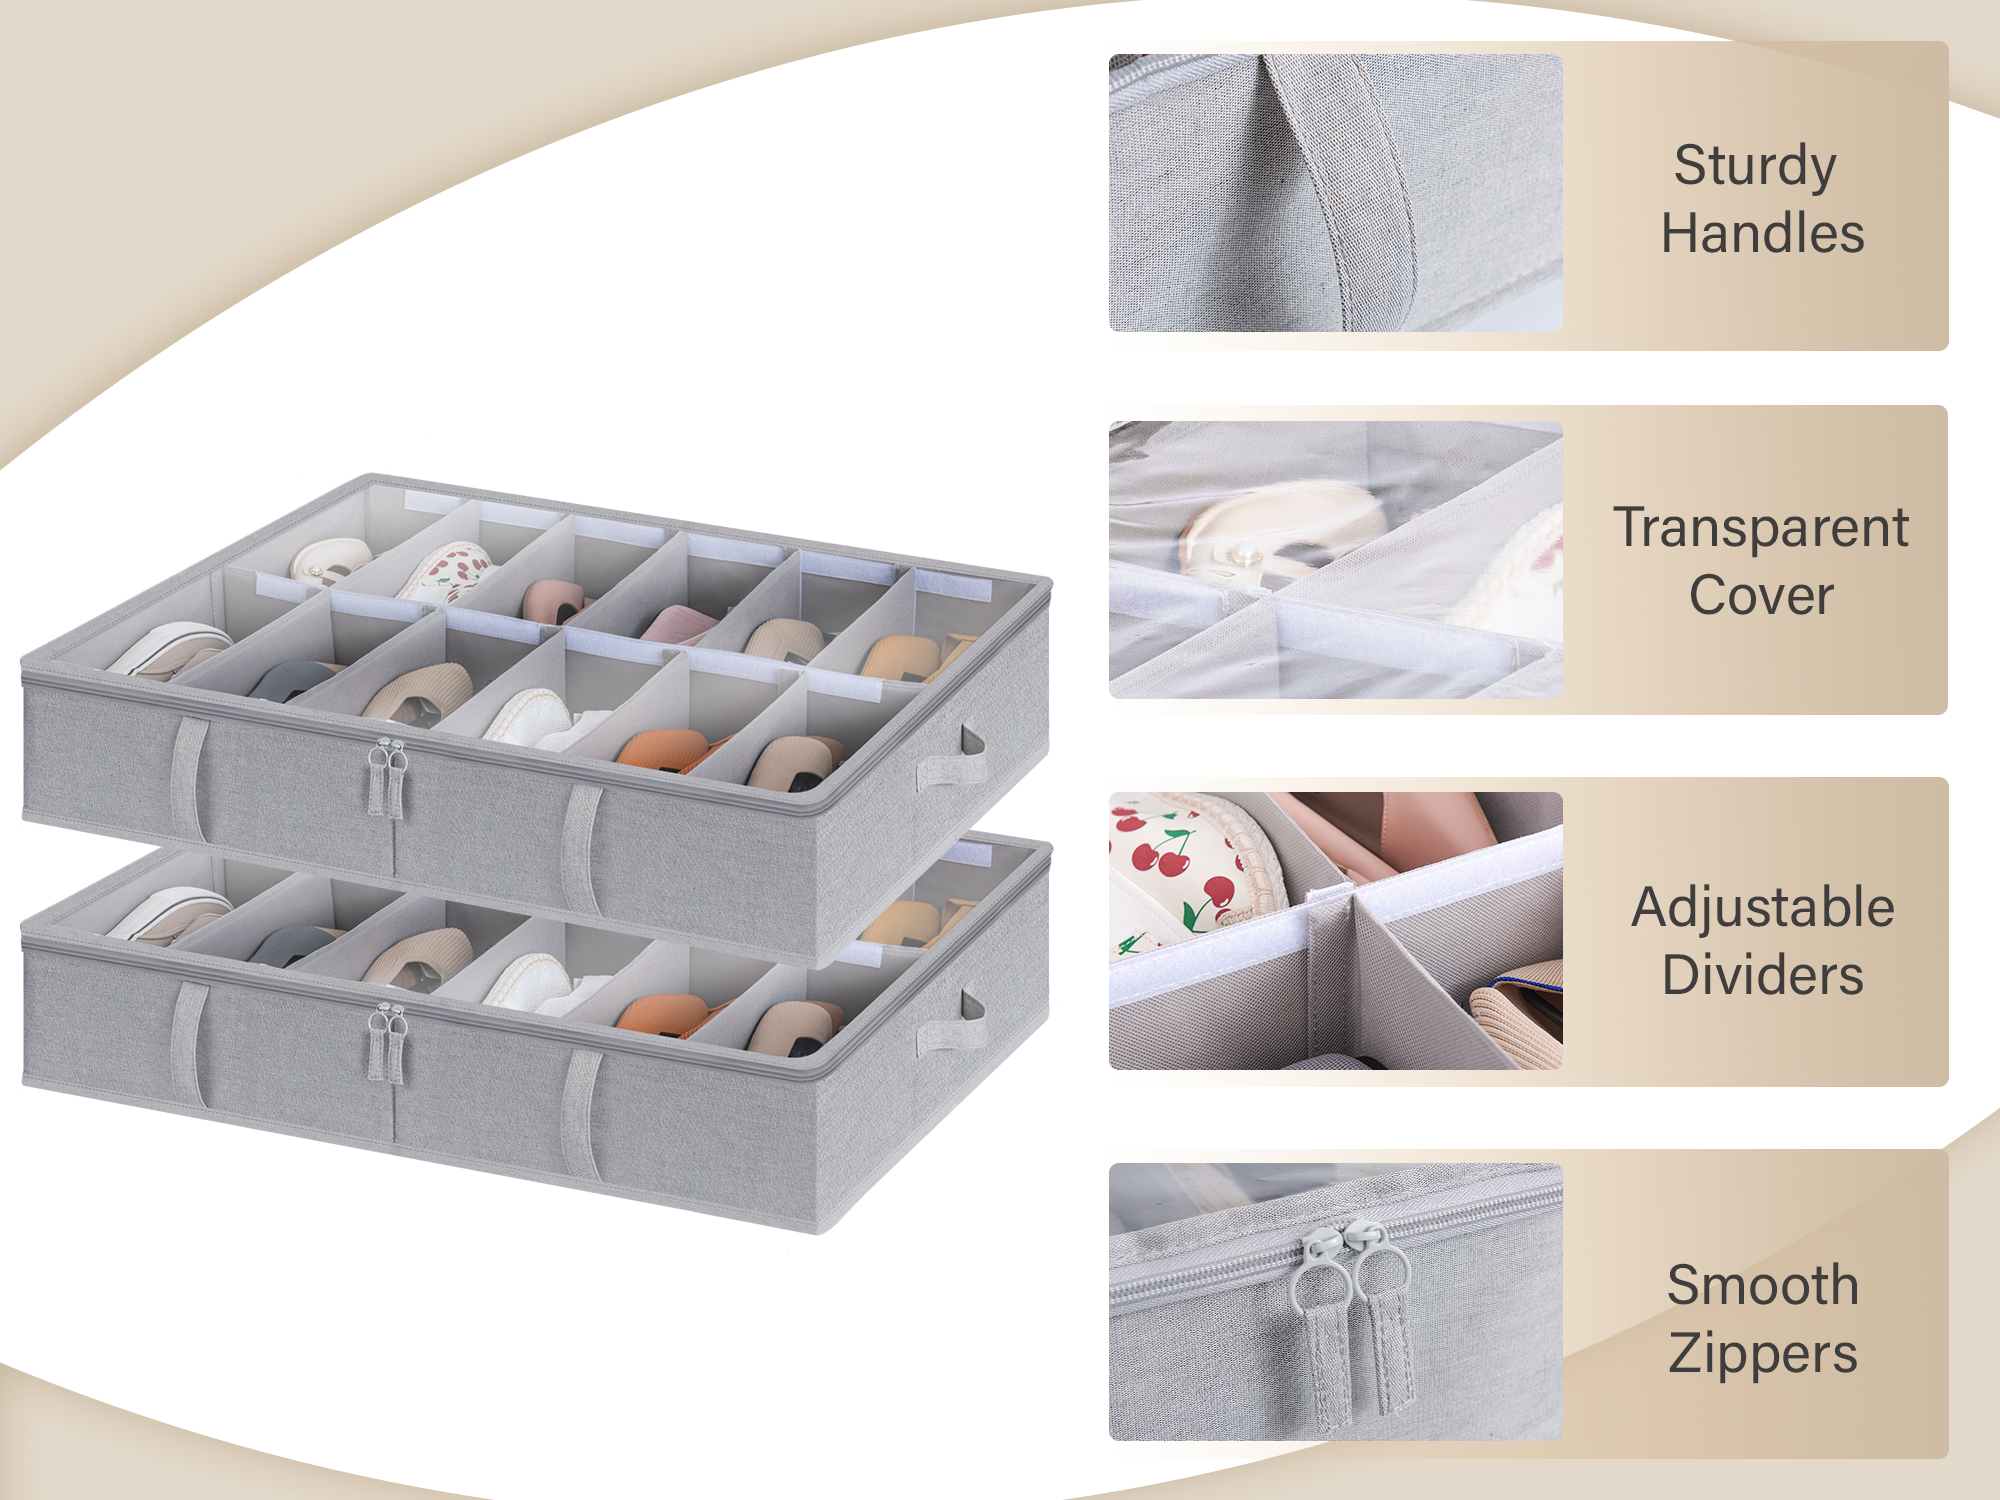 This underbed storage bin features sturdy handles, transparent cover, adjustable dividers, and smooth zippers.